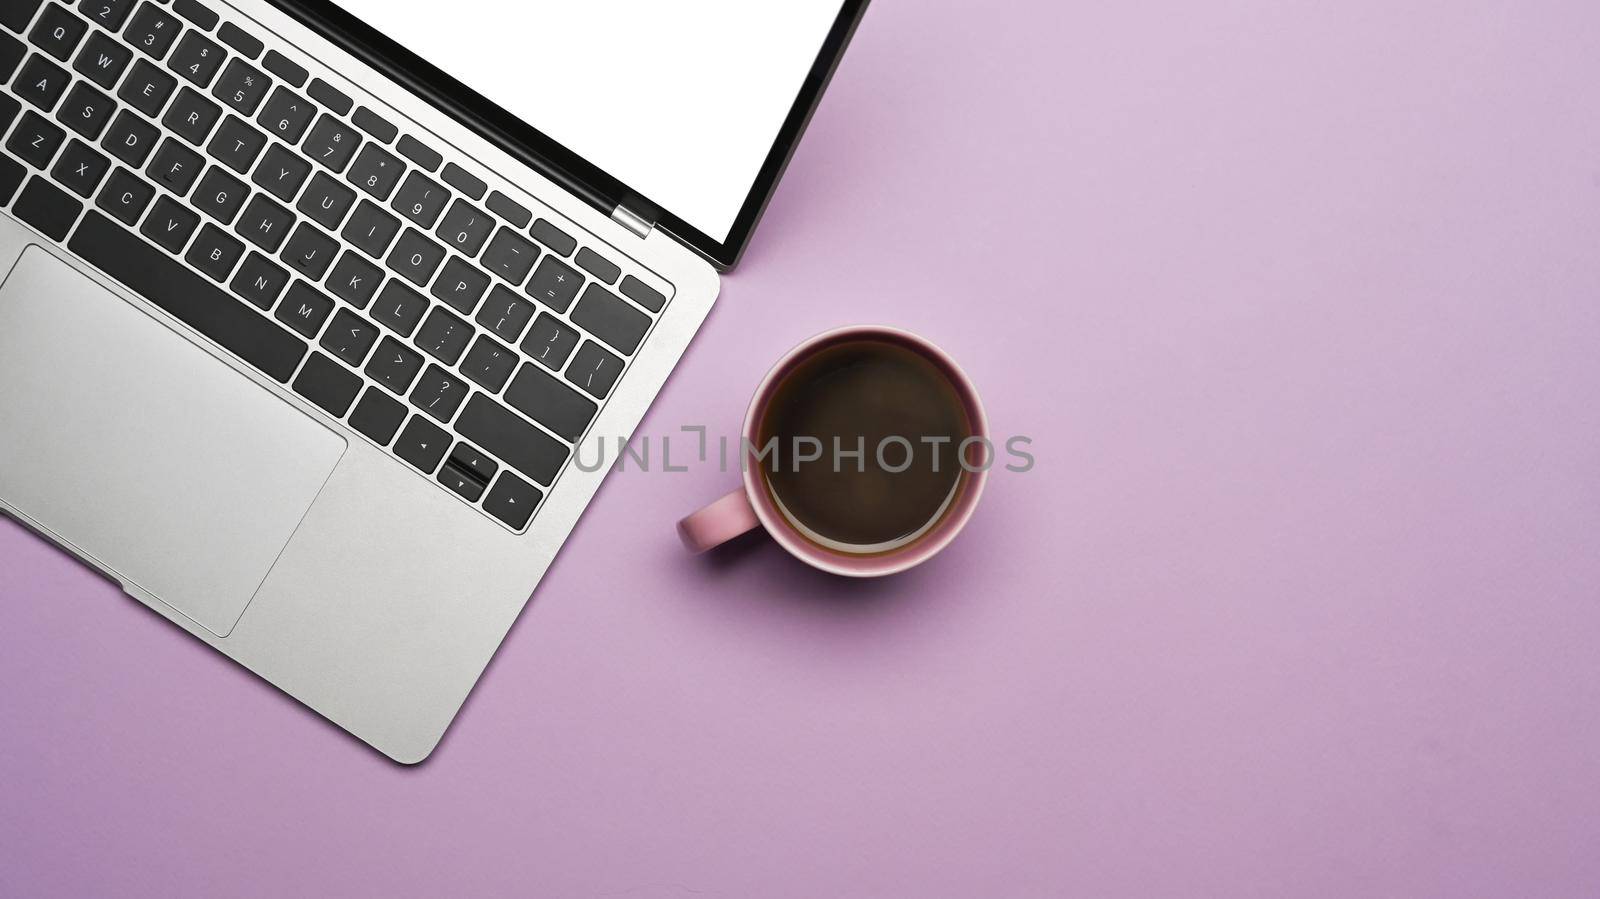 Mockup laptop computer and coffee cup on purple background. Flat lay. by prathanchorruangsak